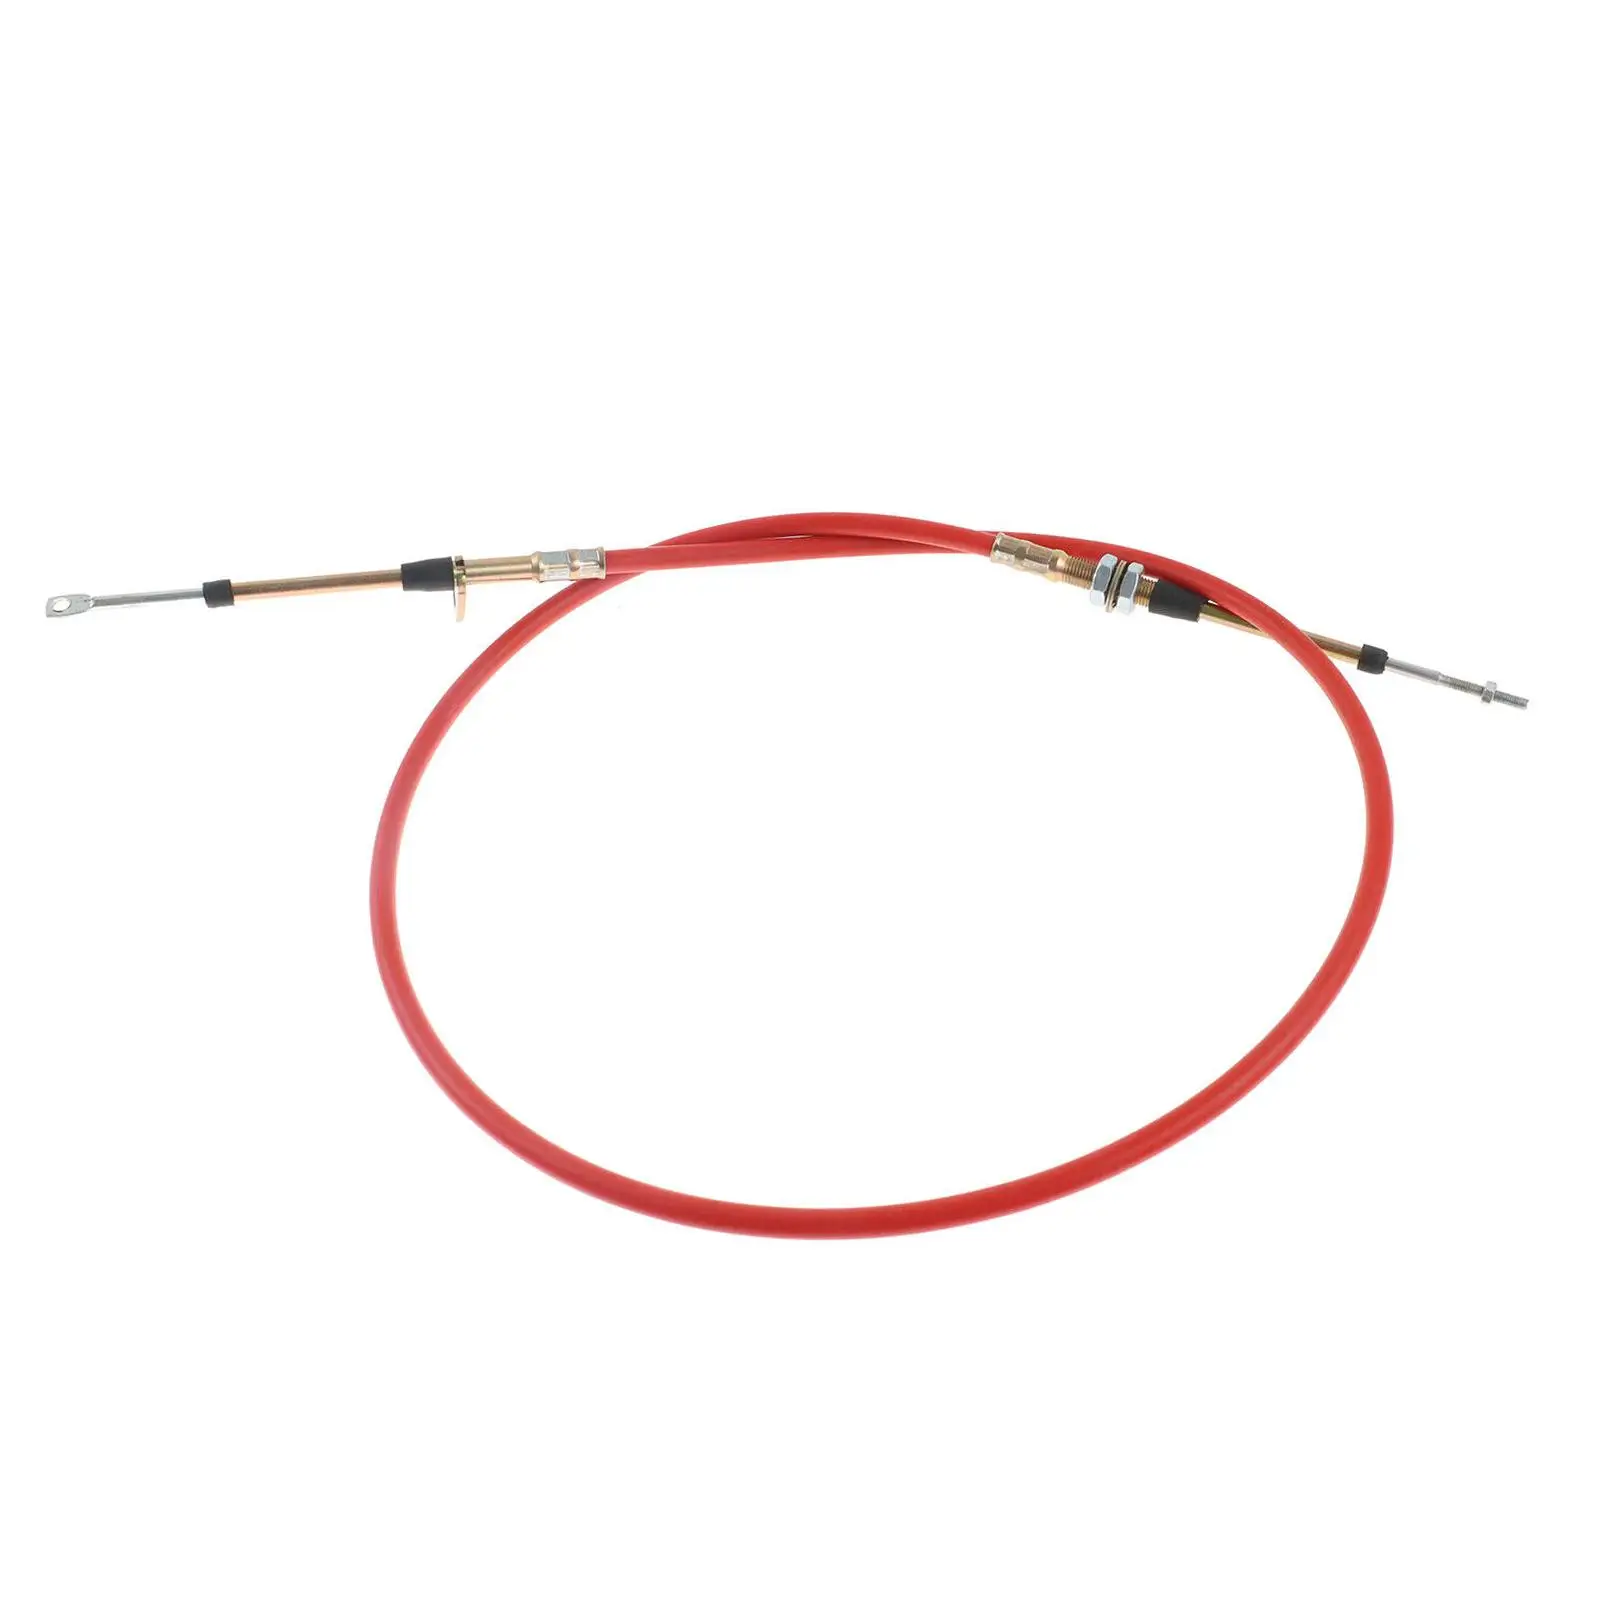 Shifter Cable Heavy Duty AF721002 Car Accessories for B M Shifters Parts High Performance Lightweight Easy to Install